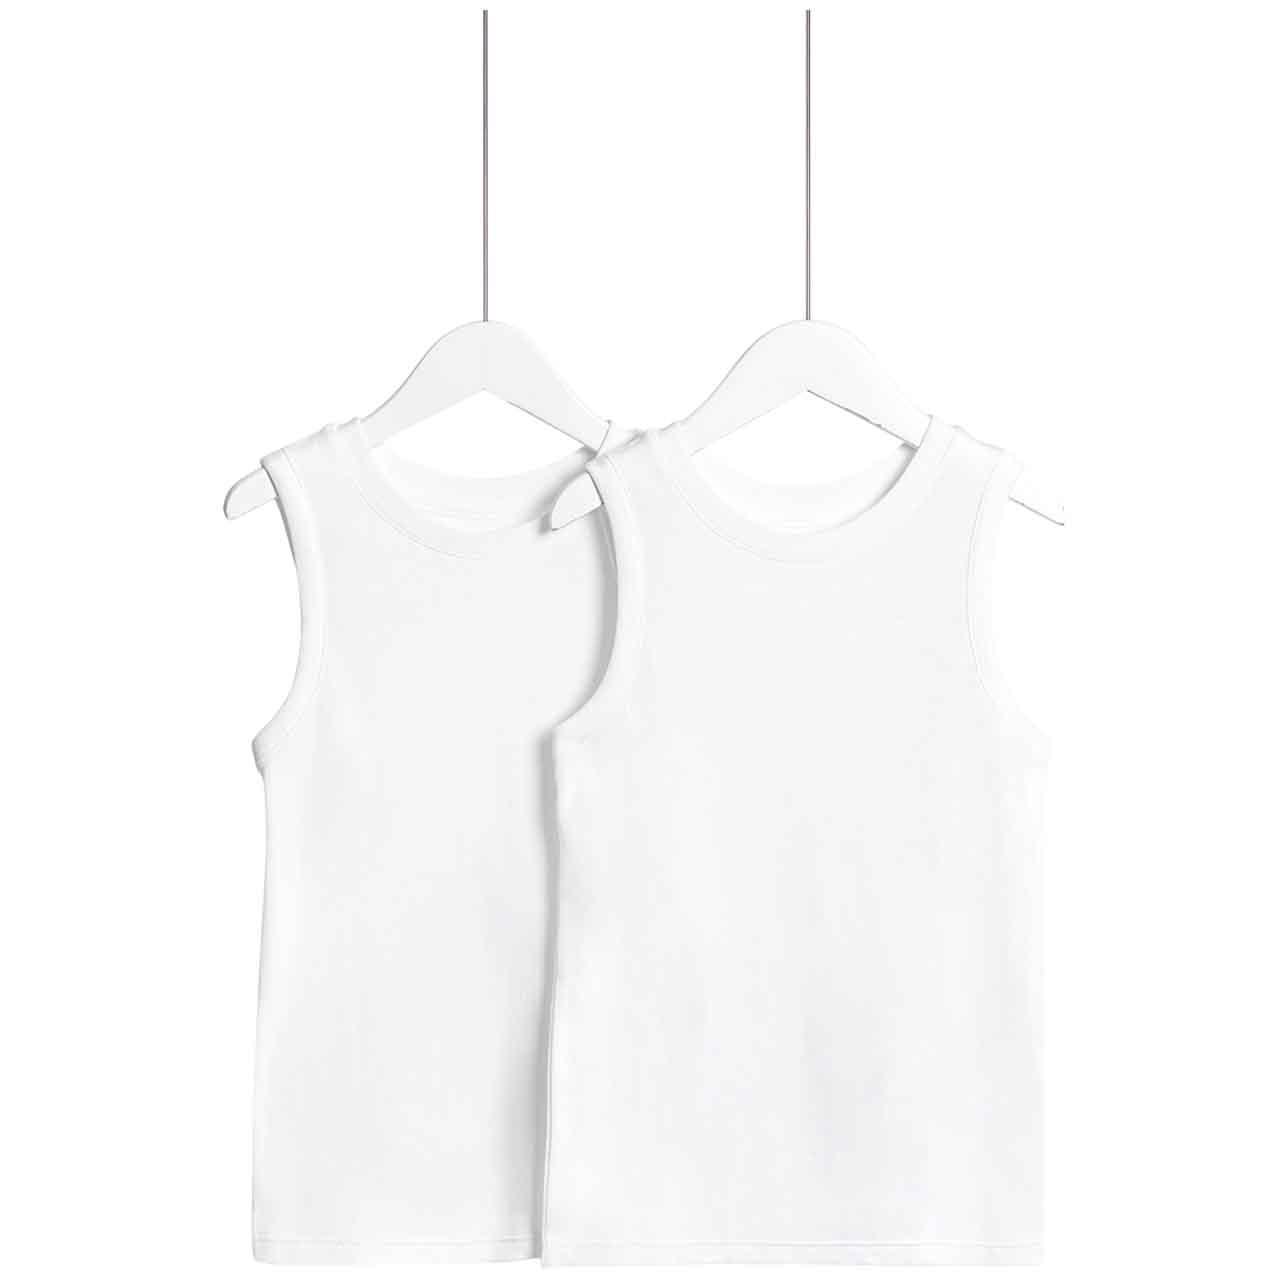 M&S Thermal Vest, 8-9 Years, White, 2 Pack 